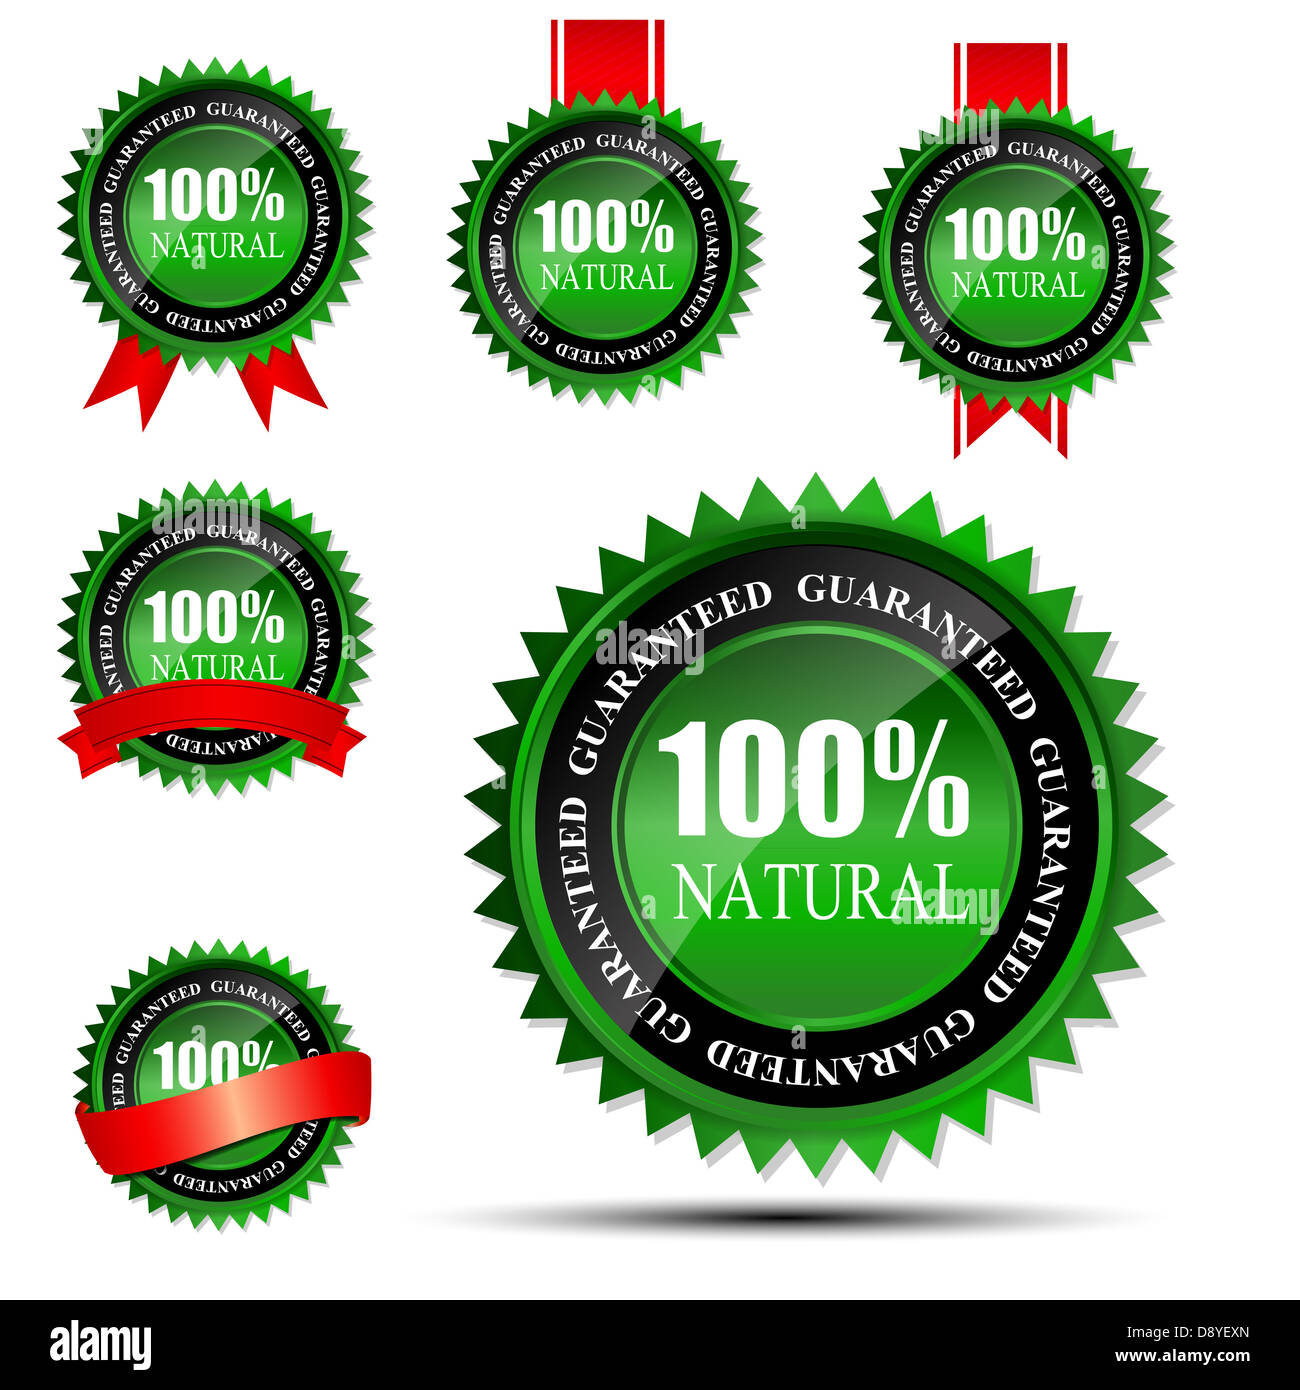 100% natural green label isolated on white.vector illustration Stock Photo